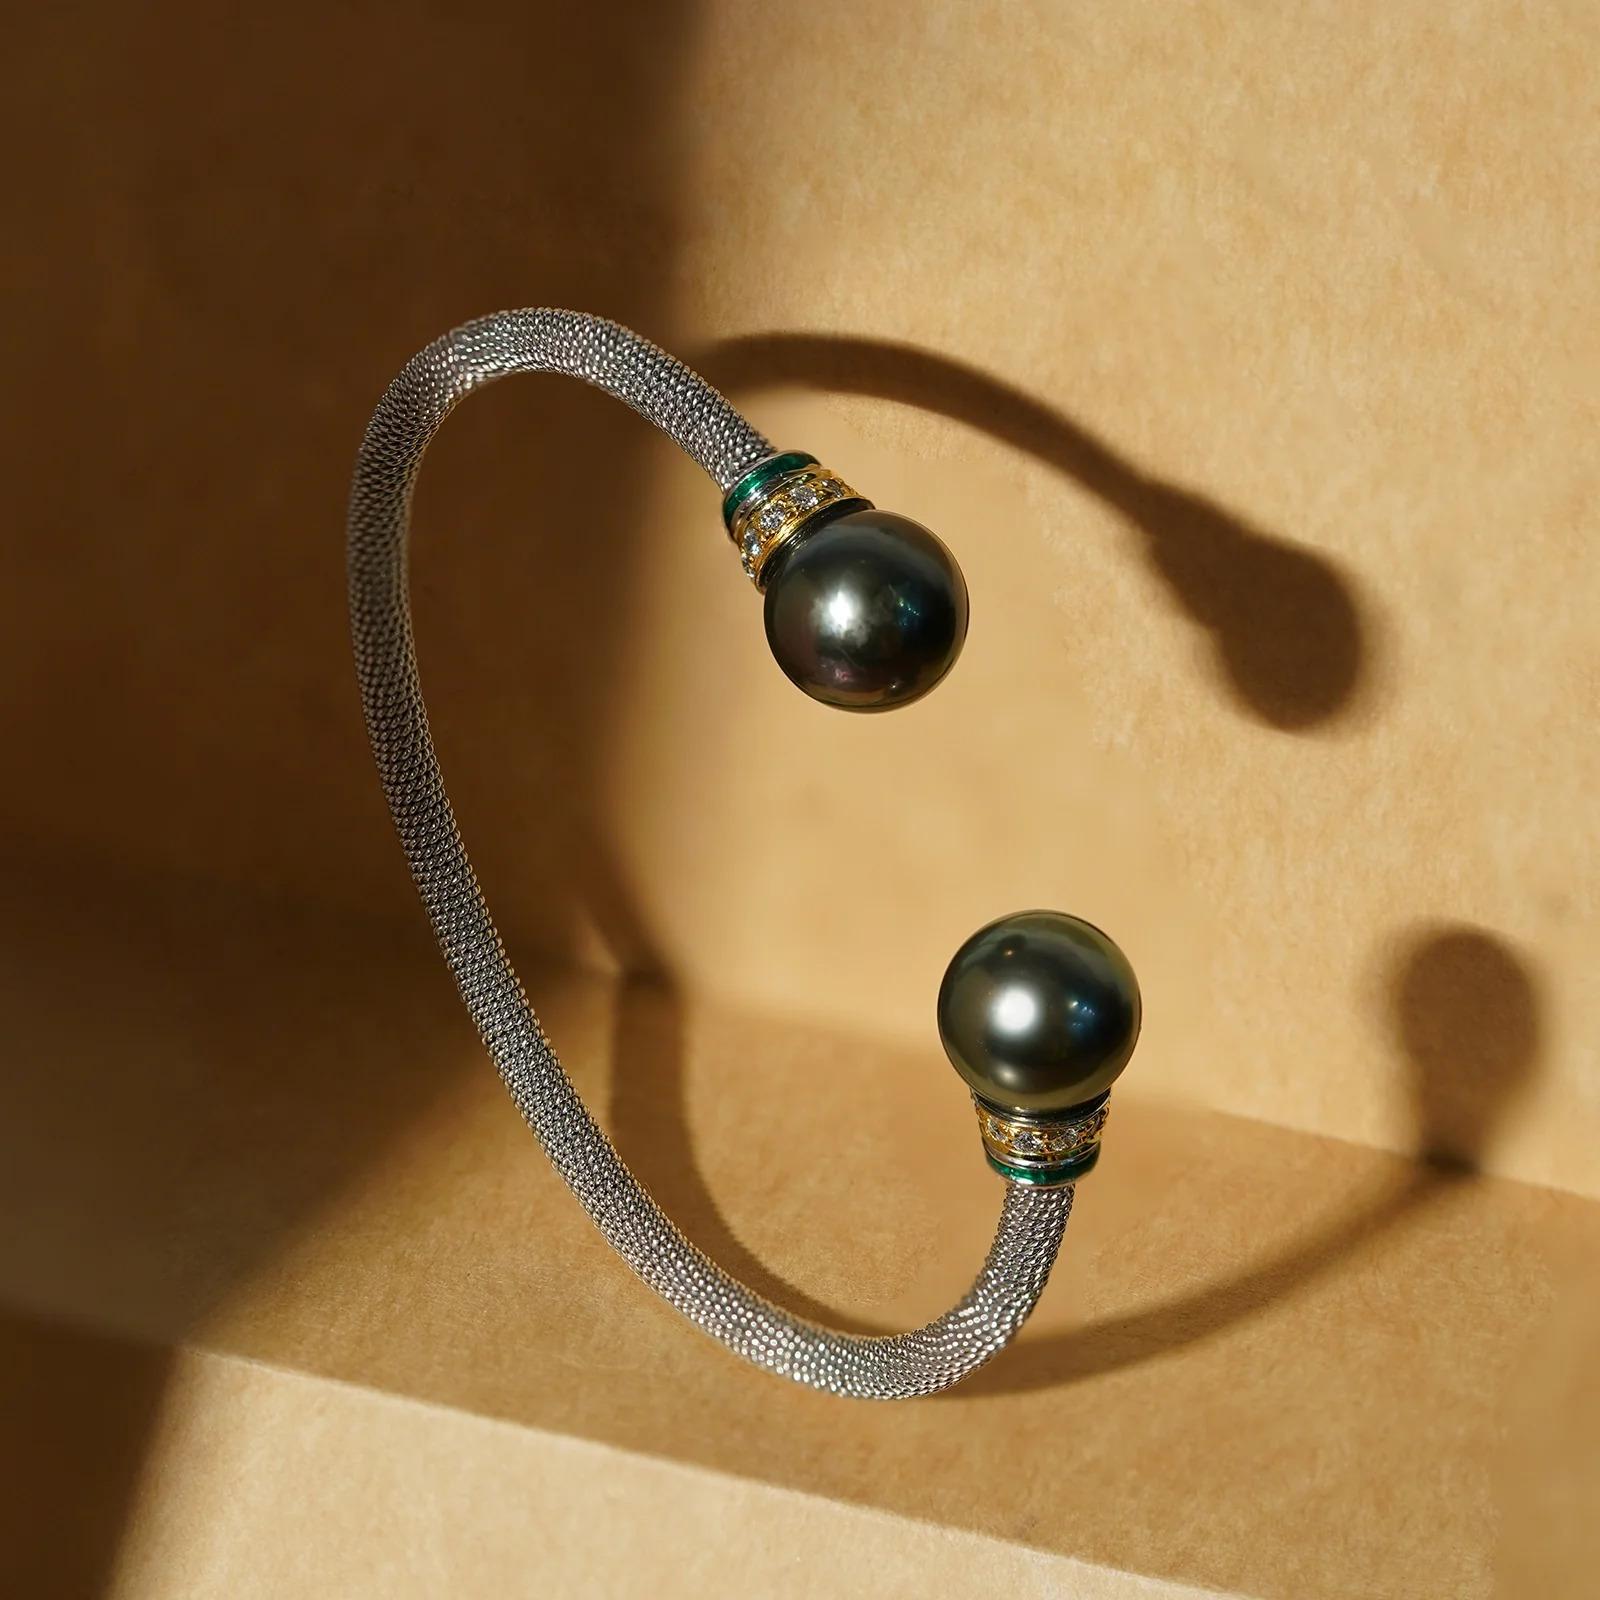 Gold(18K) : 6.18g
Gold(14K) : 2.32g
Diamonds : (VS clarity & H-I colour): (Brilliant cut) : 0.26ct
Gemstone : Tahitian Pearl
Silver Alloy
Other : Green Enamel

A minimal, refined beauty that effortlessly goes with anything and everything! Worked in